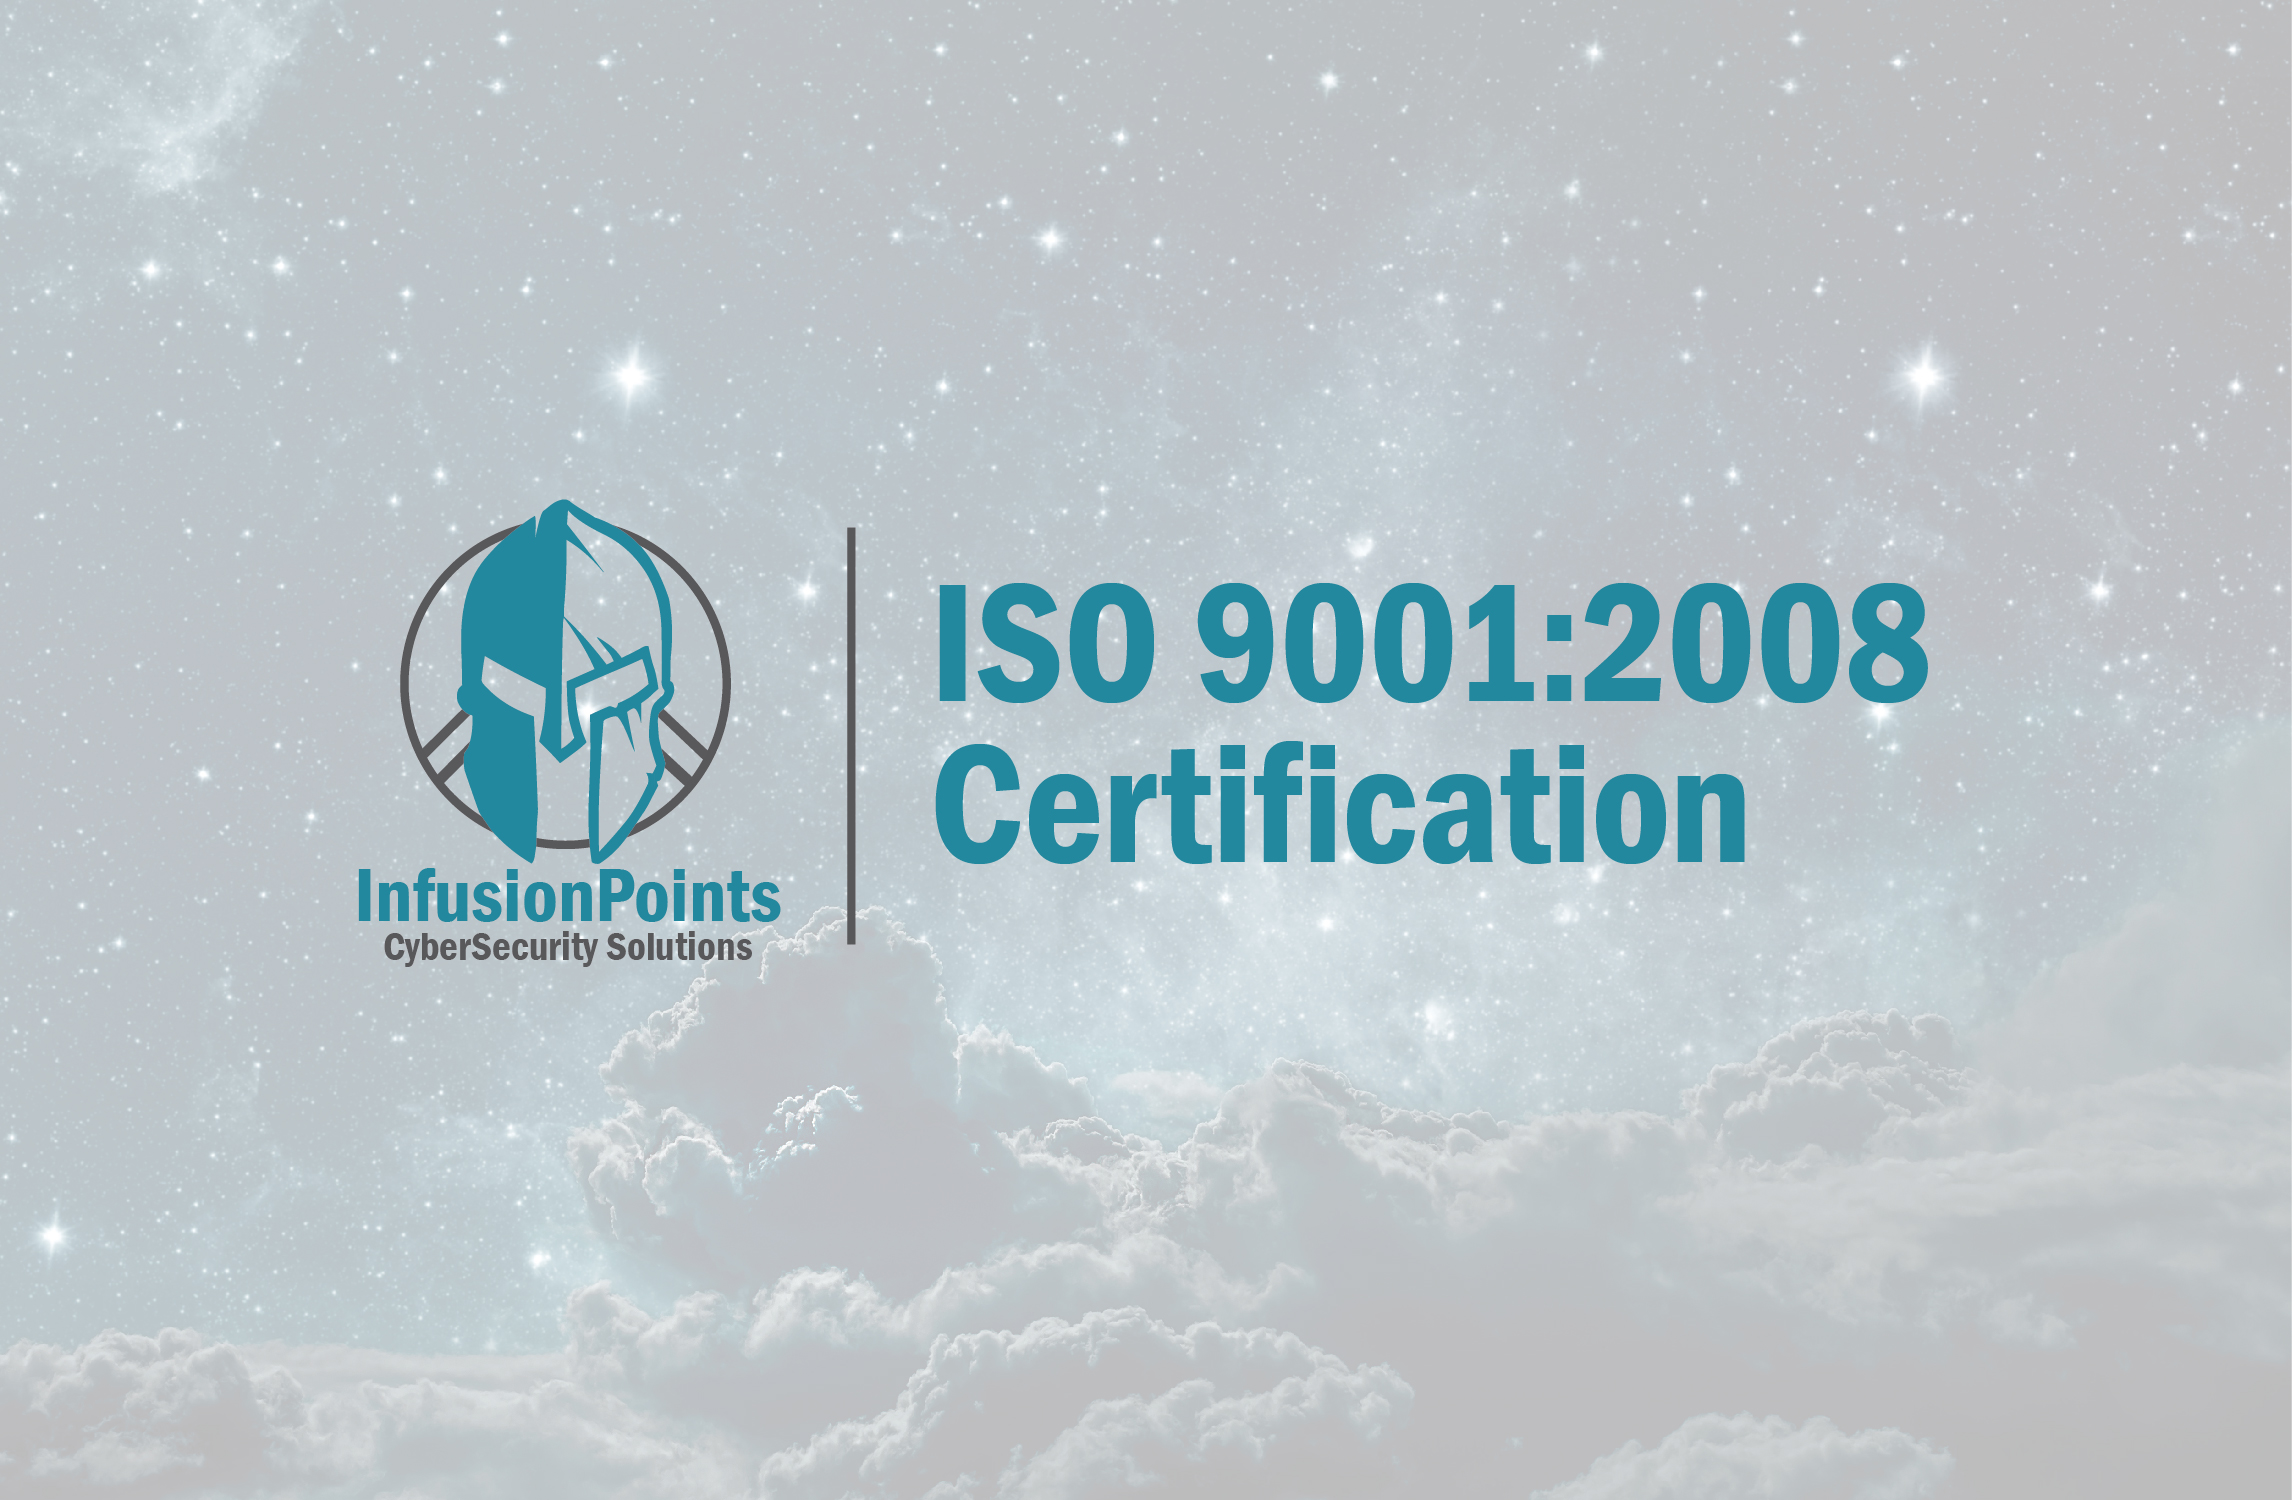 InfusionPoints 9001:2008 Certification